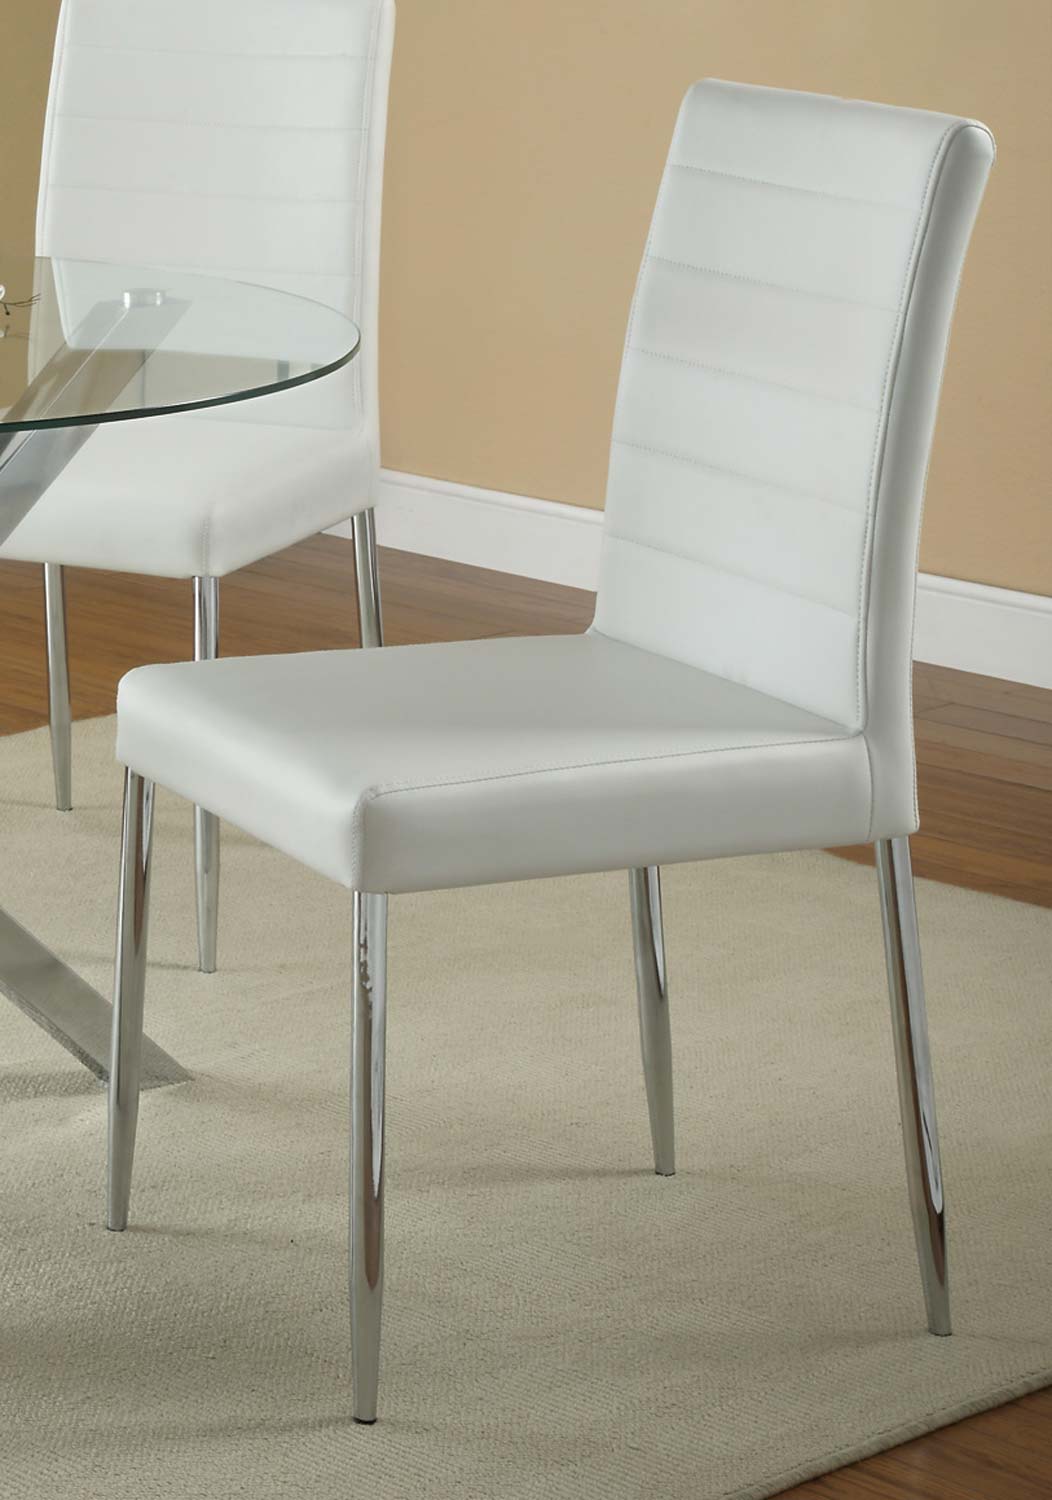 Coaster Vance Dining Chair - White